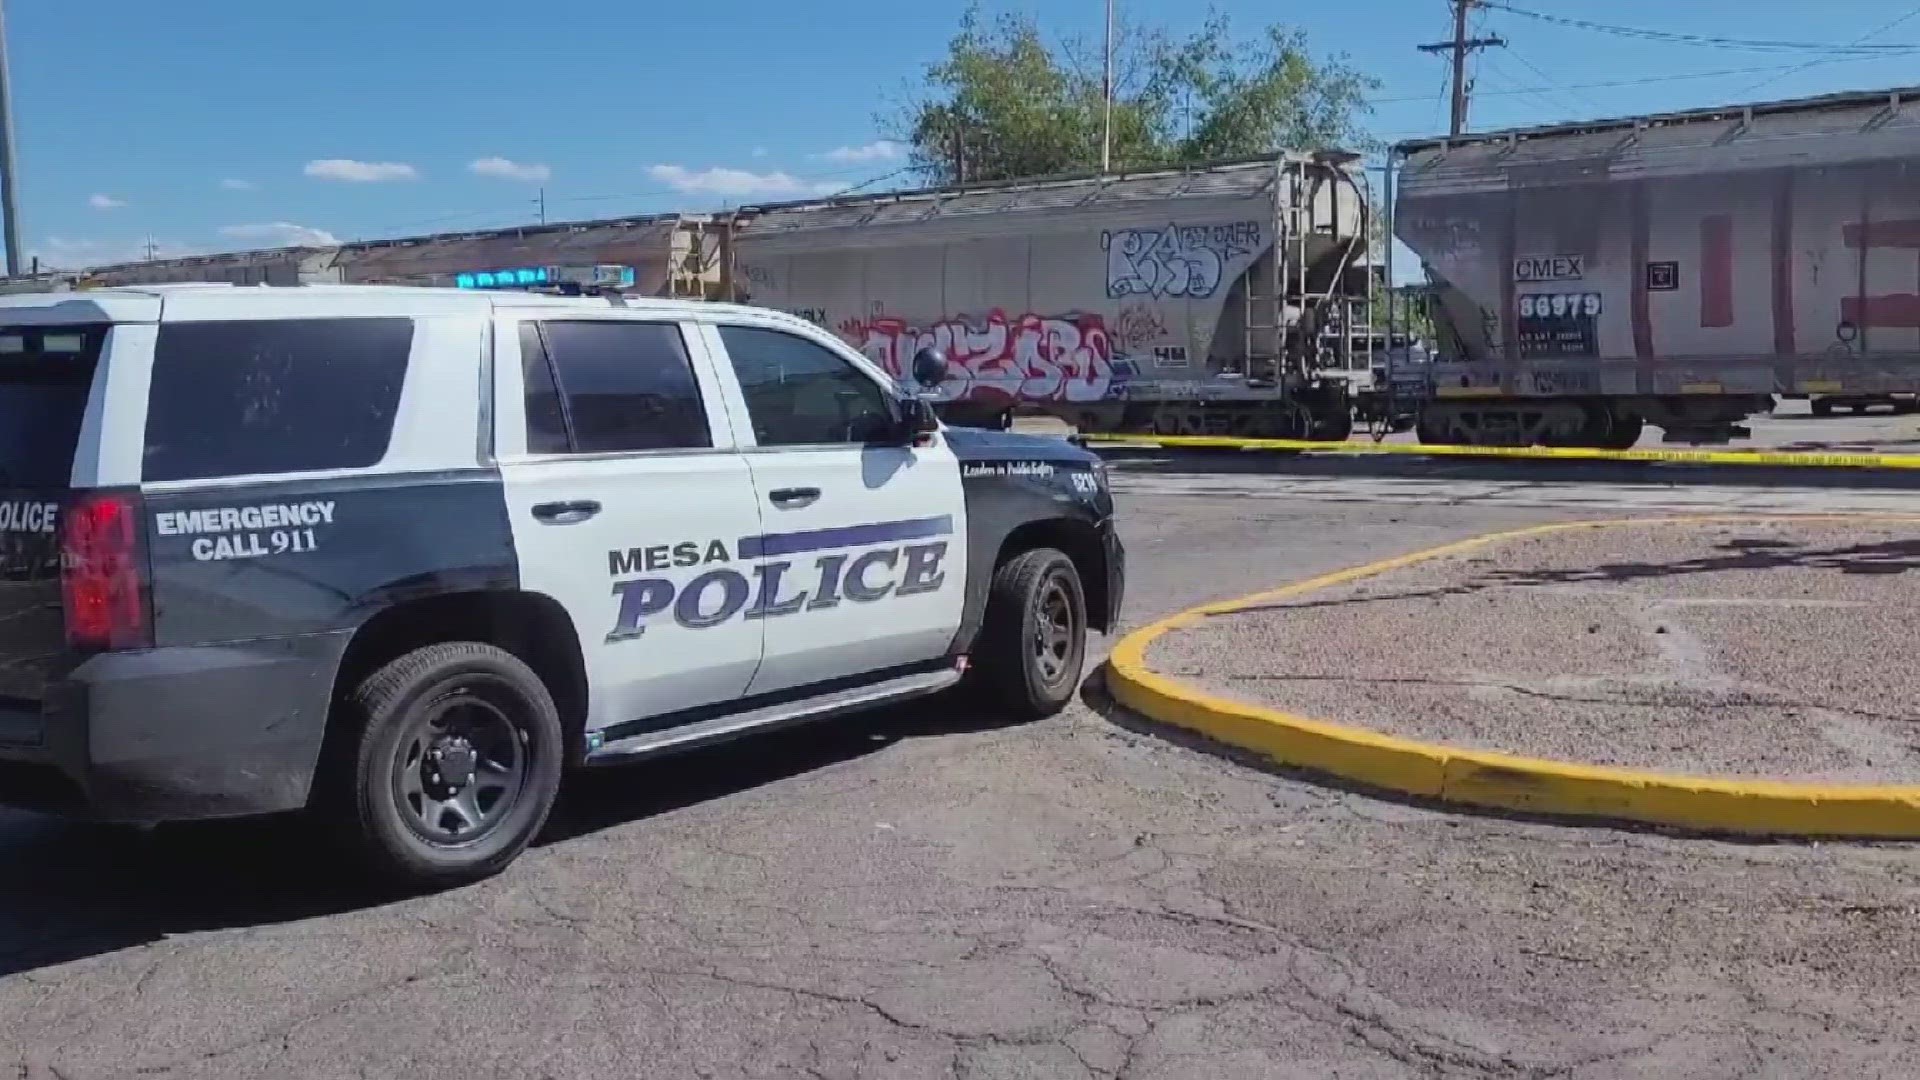 Mesa police are still trying to investigate what led to the deadly incident.